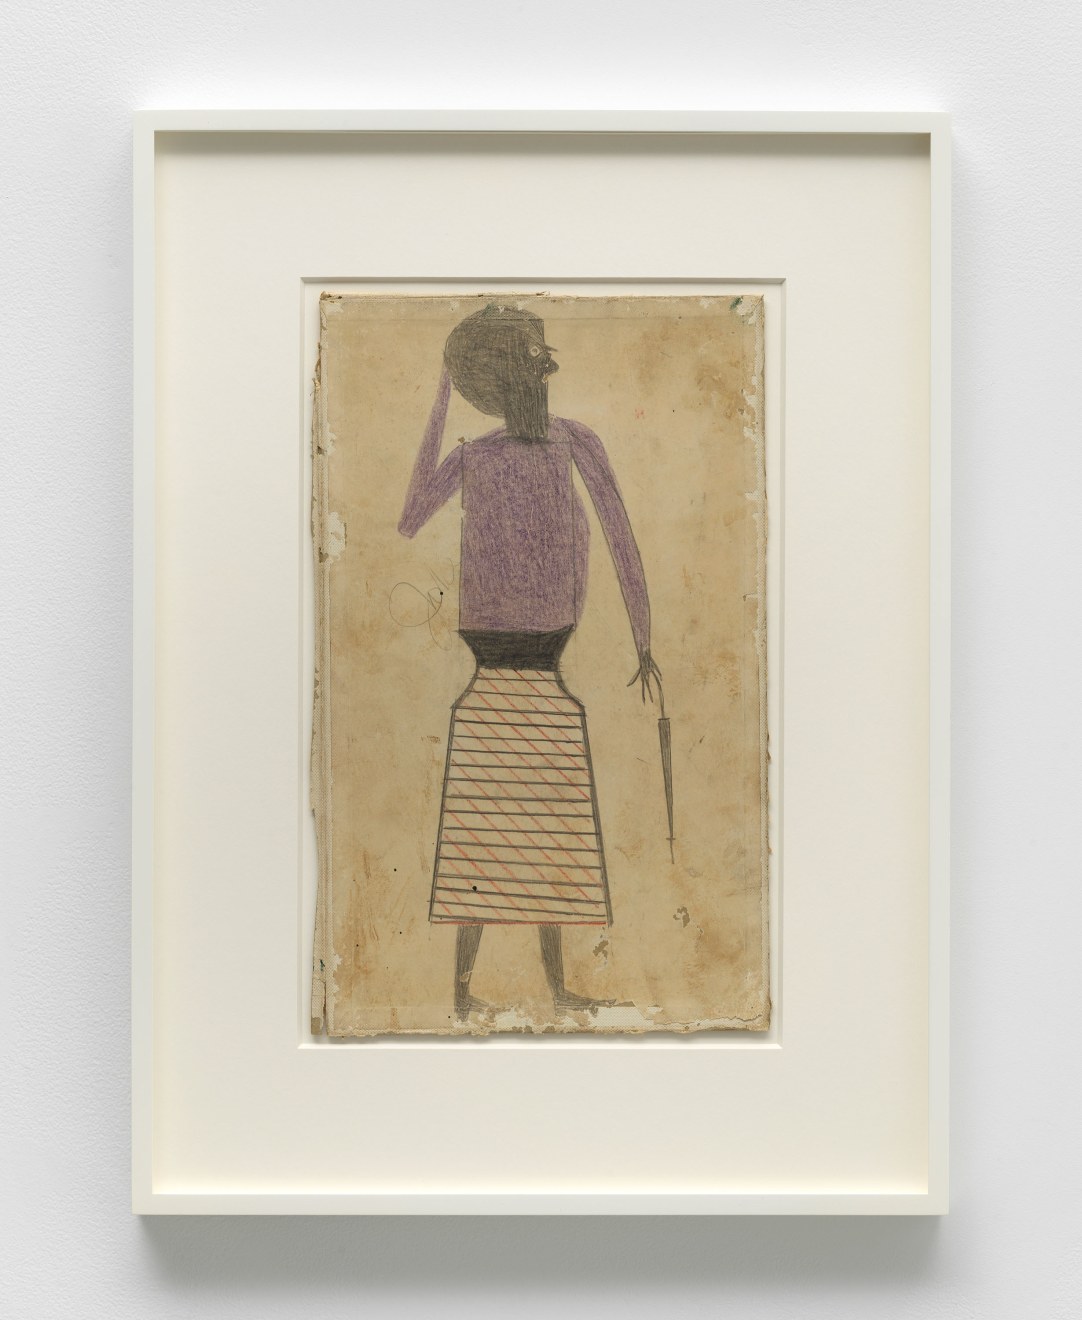 Bill Traylor, Untitled (woman with purple shirt), 1939